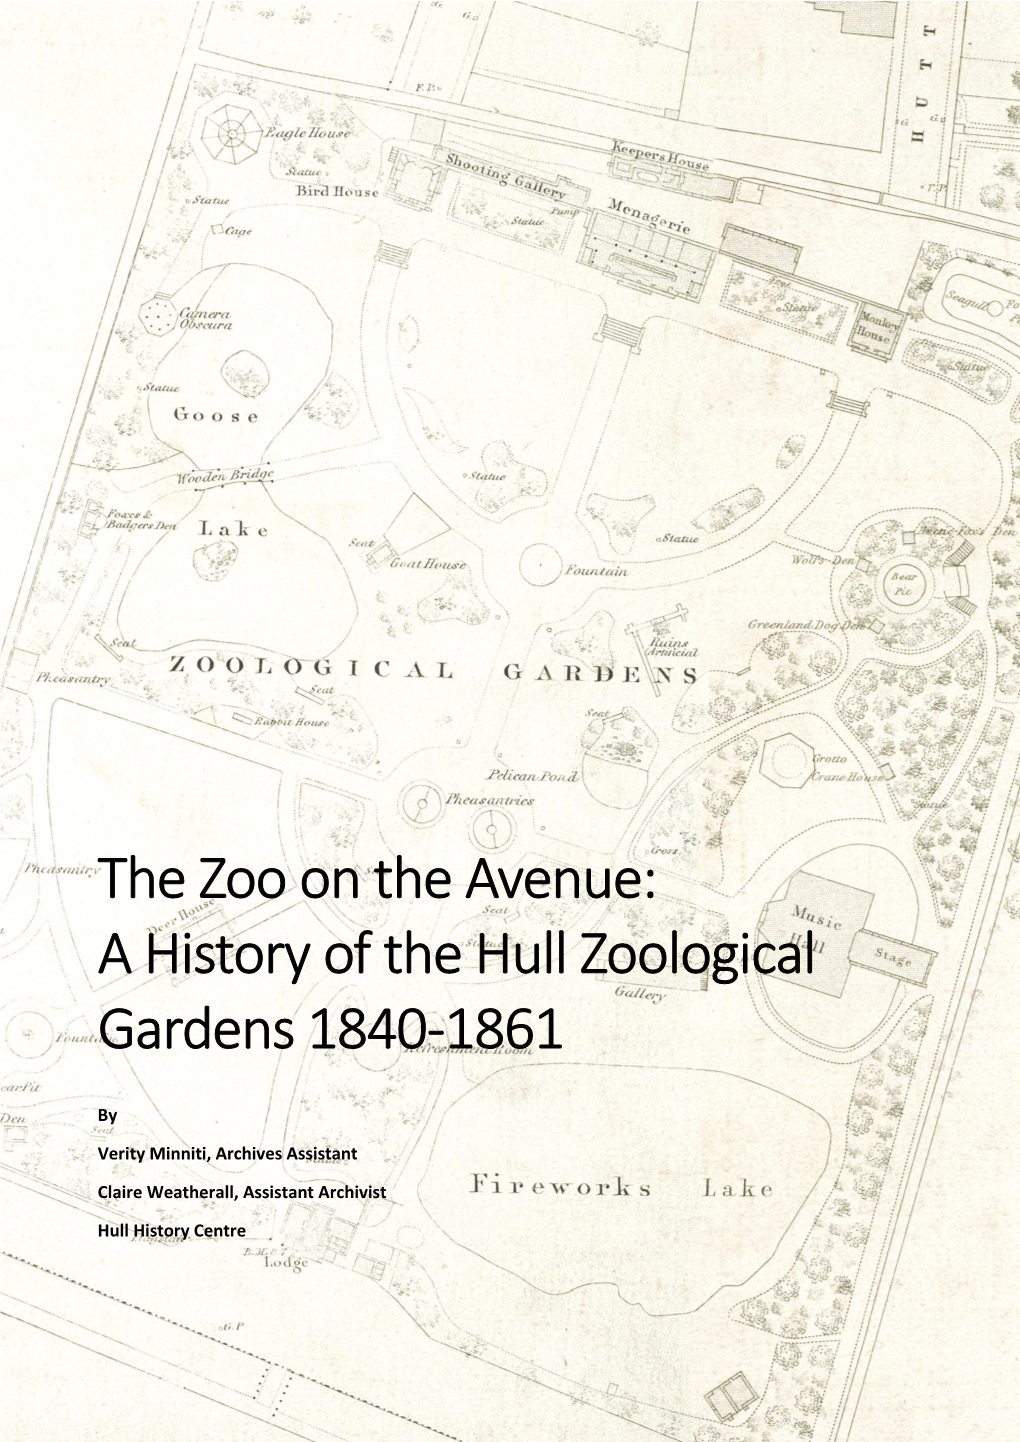 The Zoo on the Avenue: a History of the Hull Zoological Gardens 1840-1861